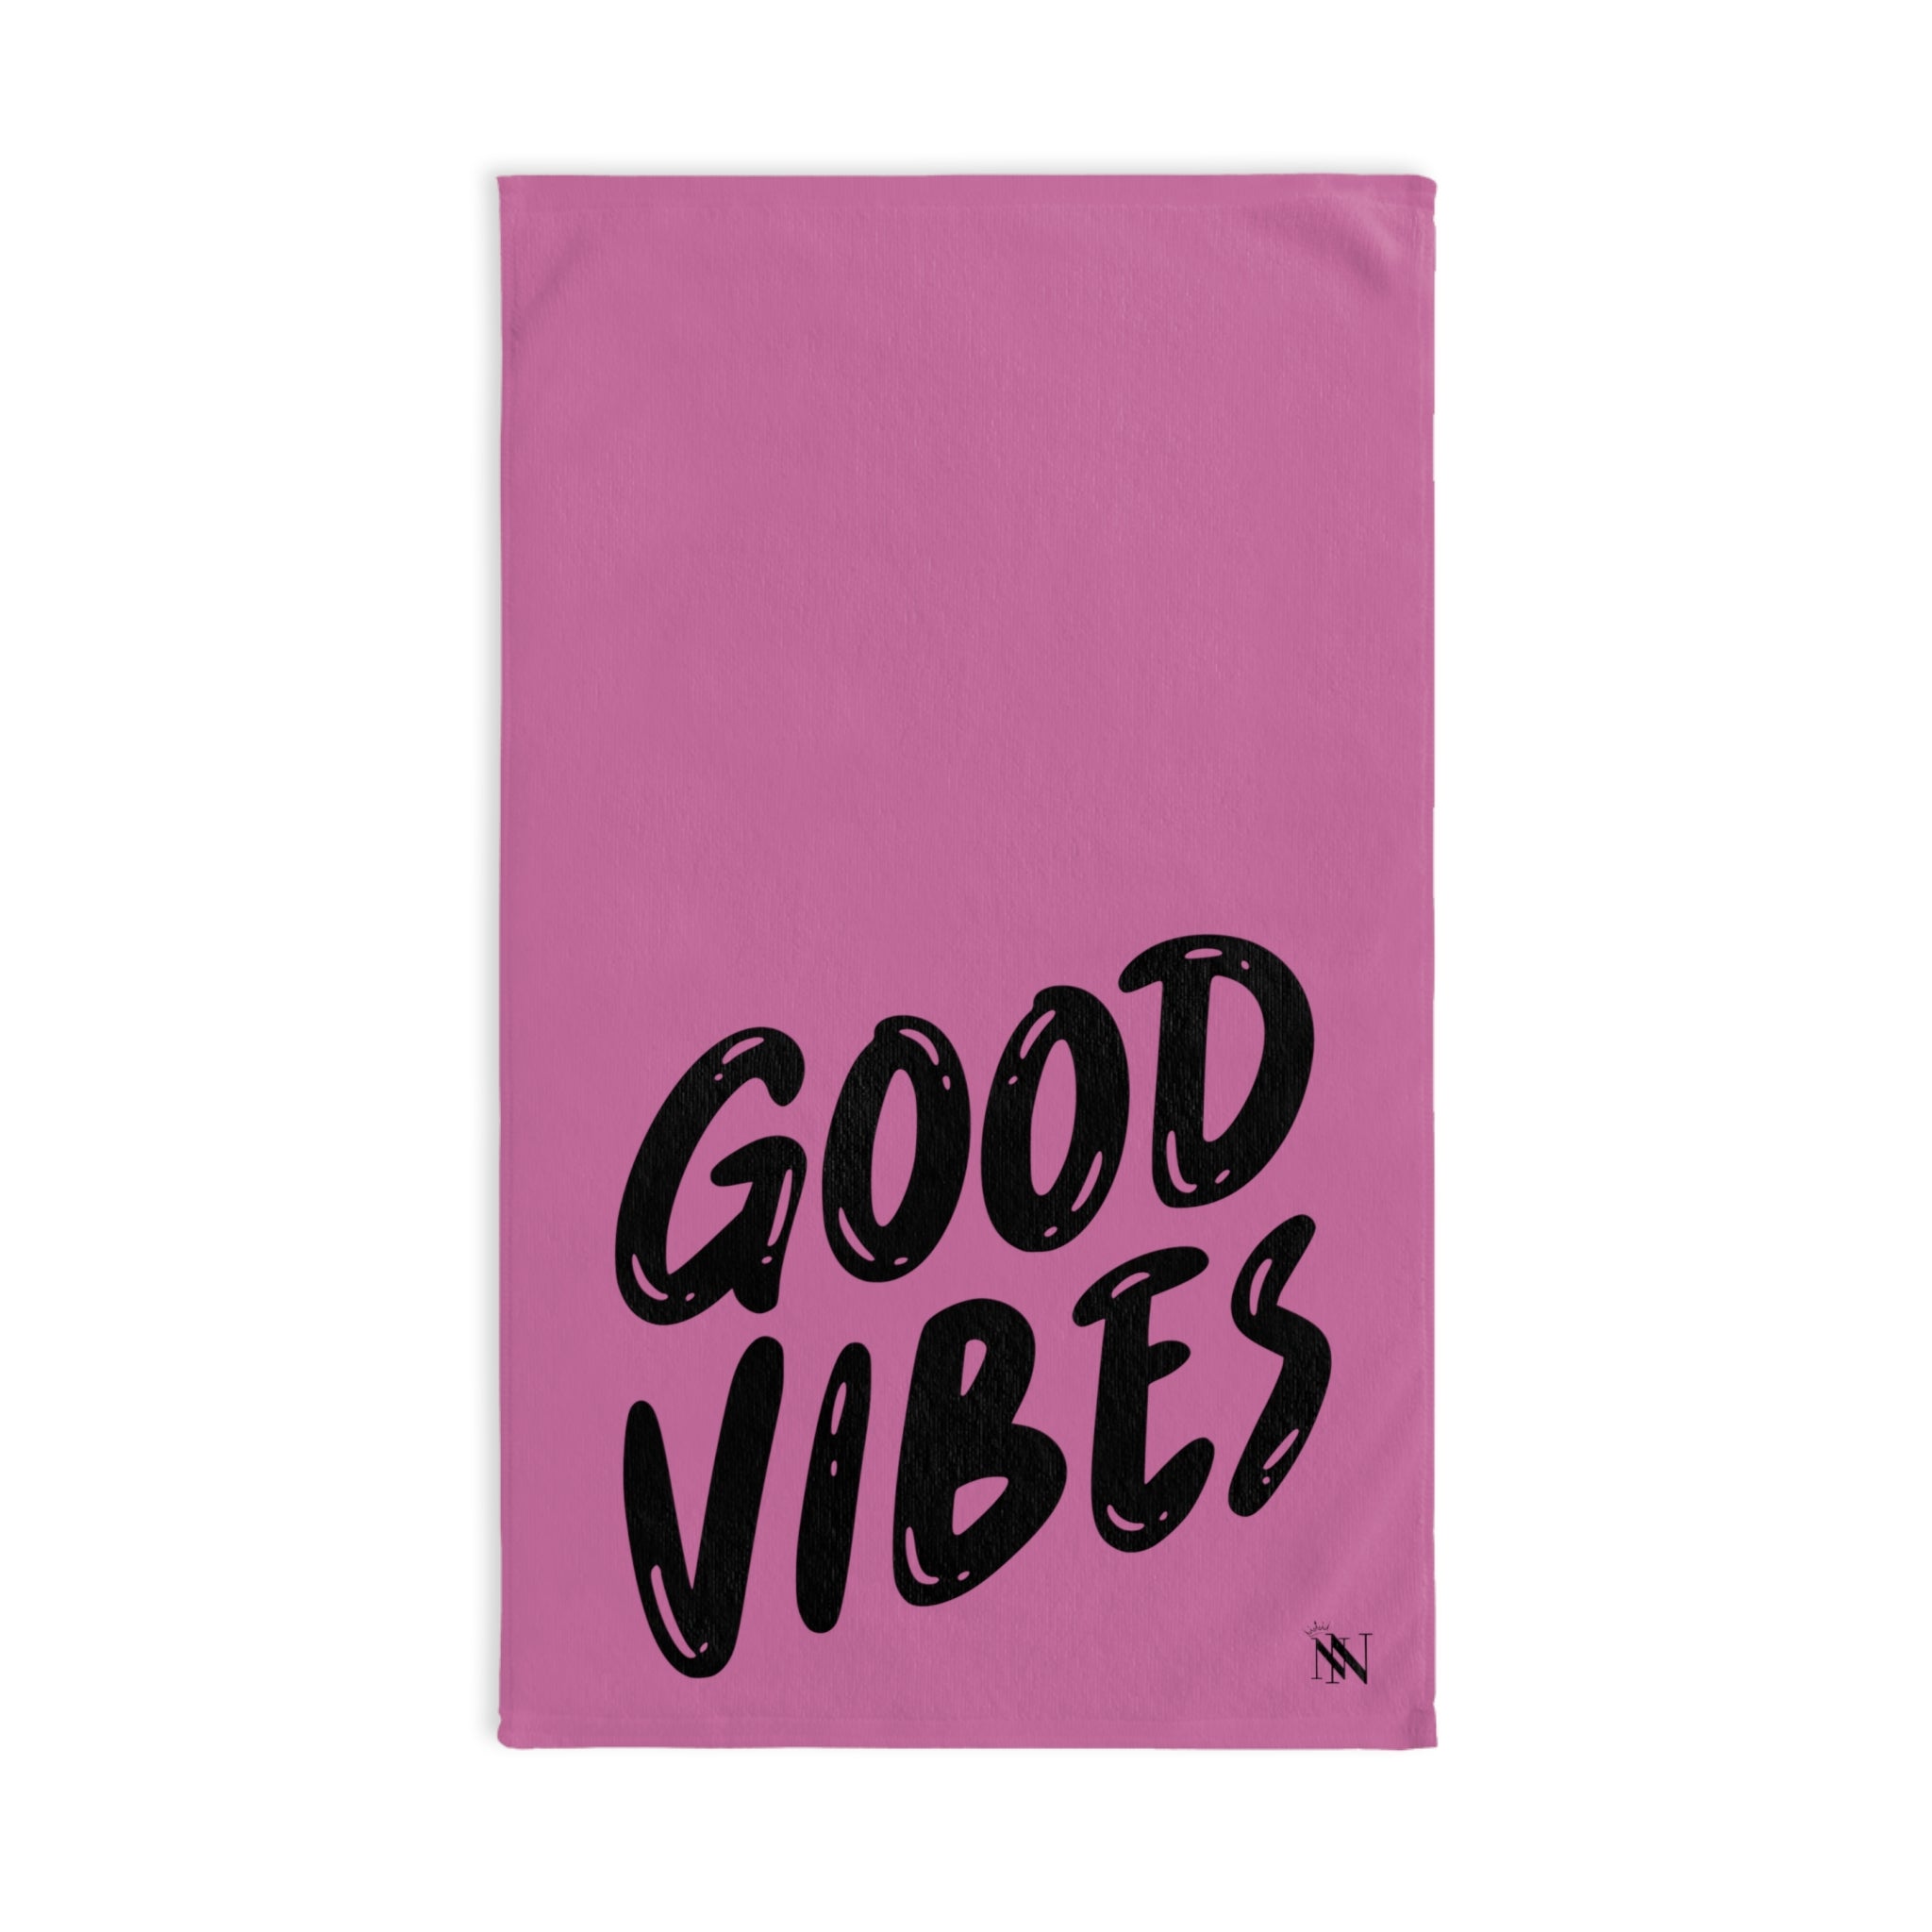 Good Vibes Bubble Pink | Novelty Gifts for Boyfriend, Funny Towel Romantic Gift for Wedding Couple Fiance First Year Anniversary Valentines, Party Gag Gifts, Joke Humor Cloth for Husband Men BF NECTAR NAPKINS